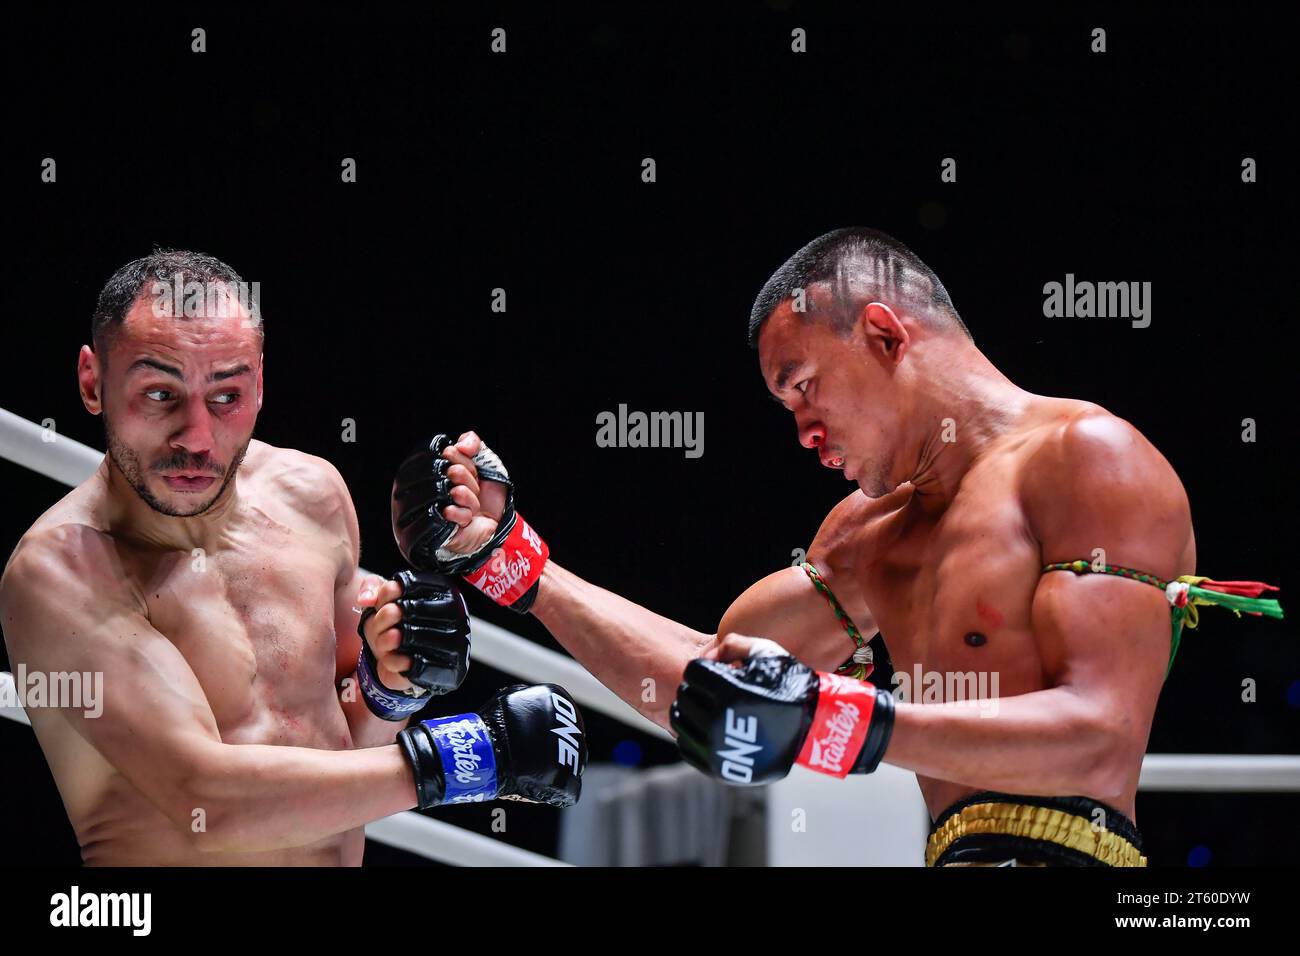 Saeksan Or. Kwanmuang (R) of Thailand and Karim Bennoui of French-Algerian seen in action during their match in ONE Fight Night 16 at Lumpinee Boxing Stadium. Stock Photo